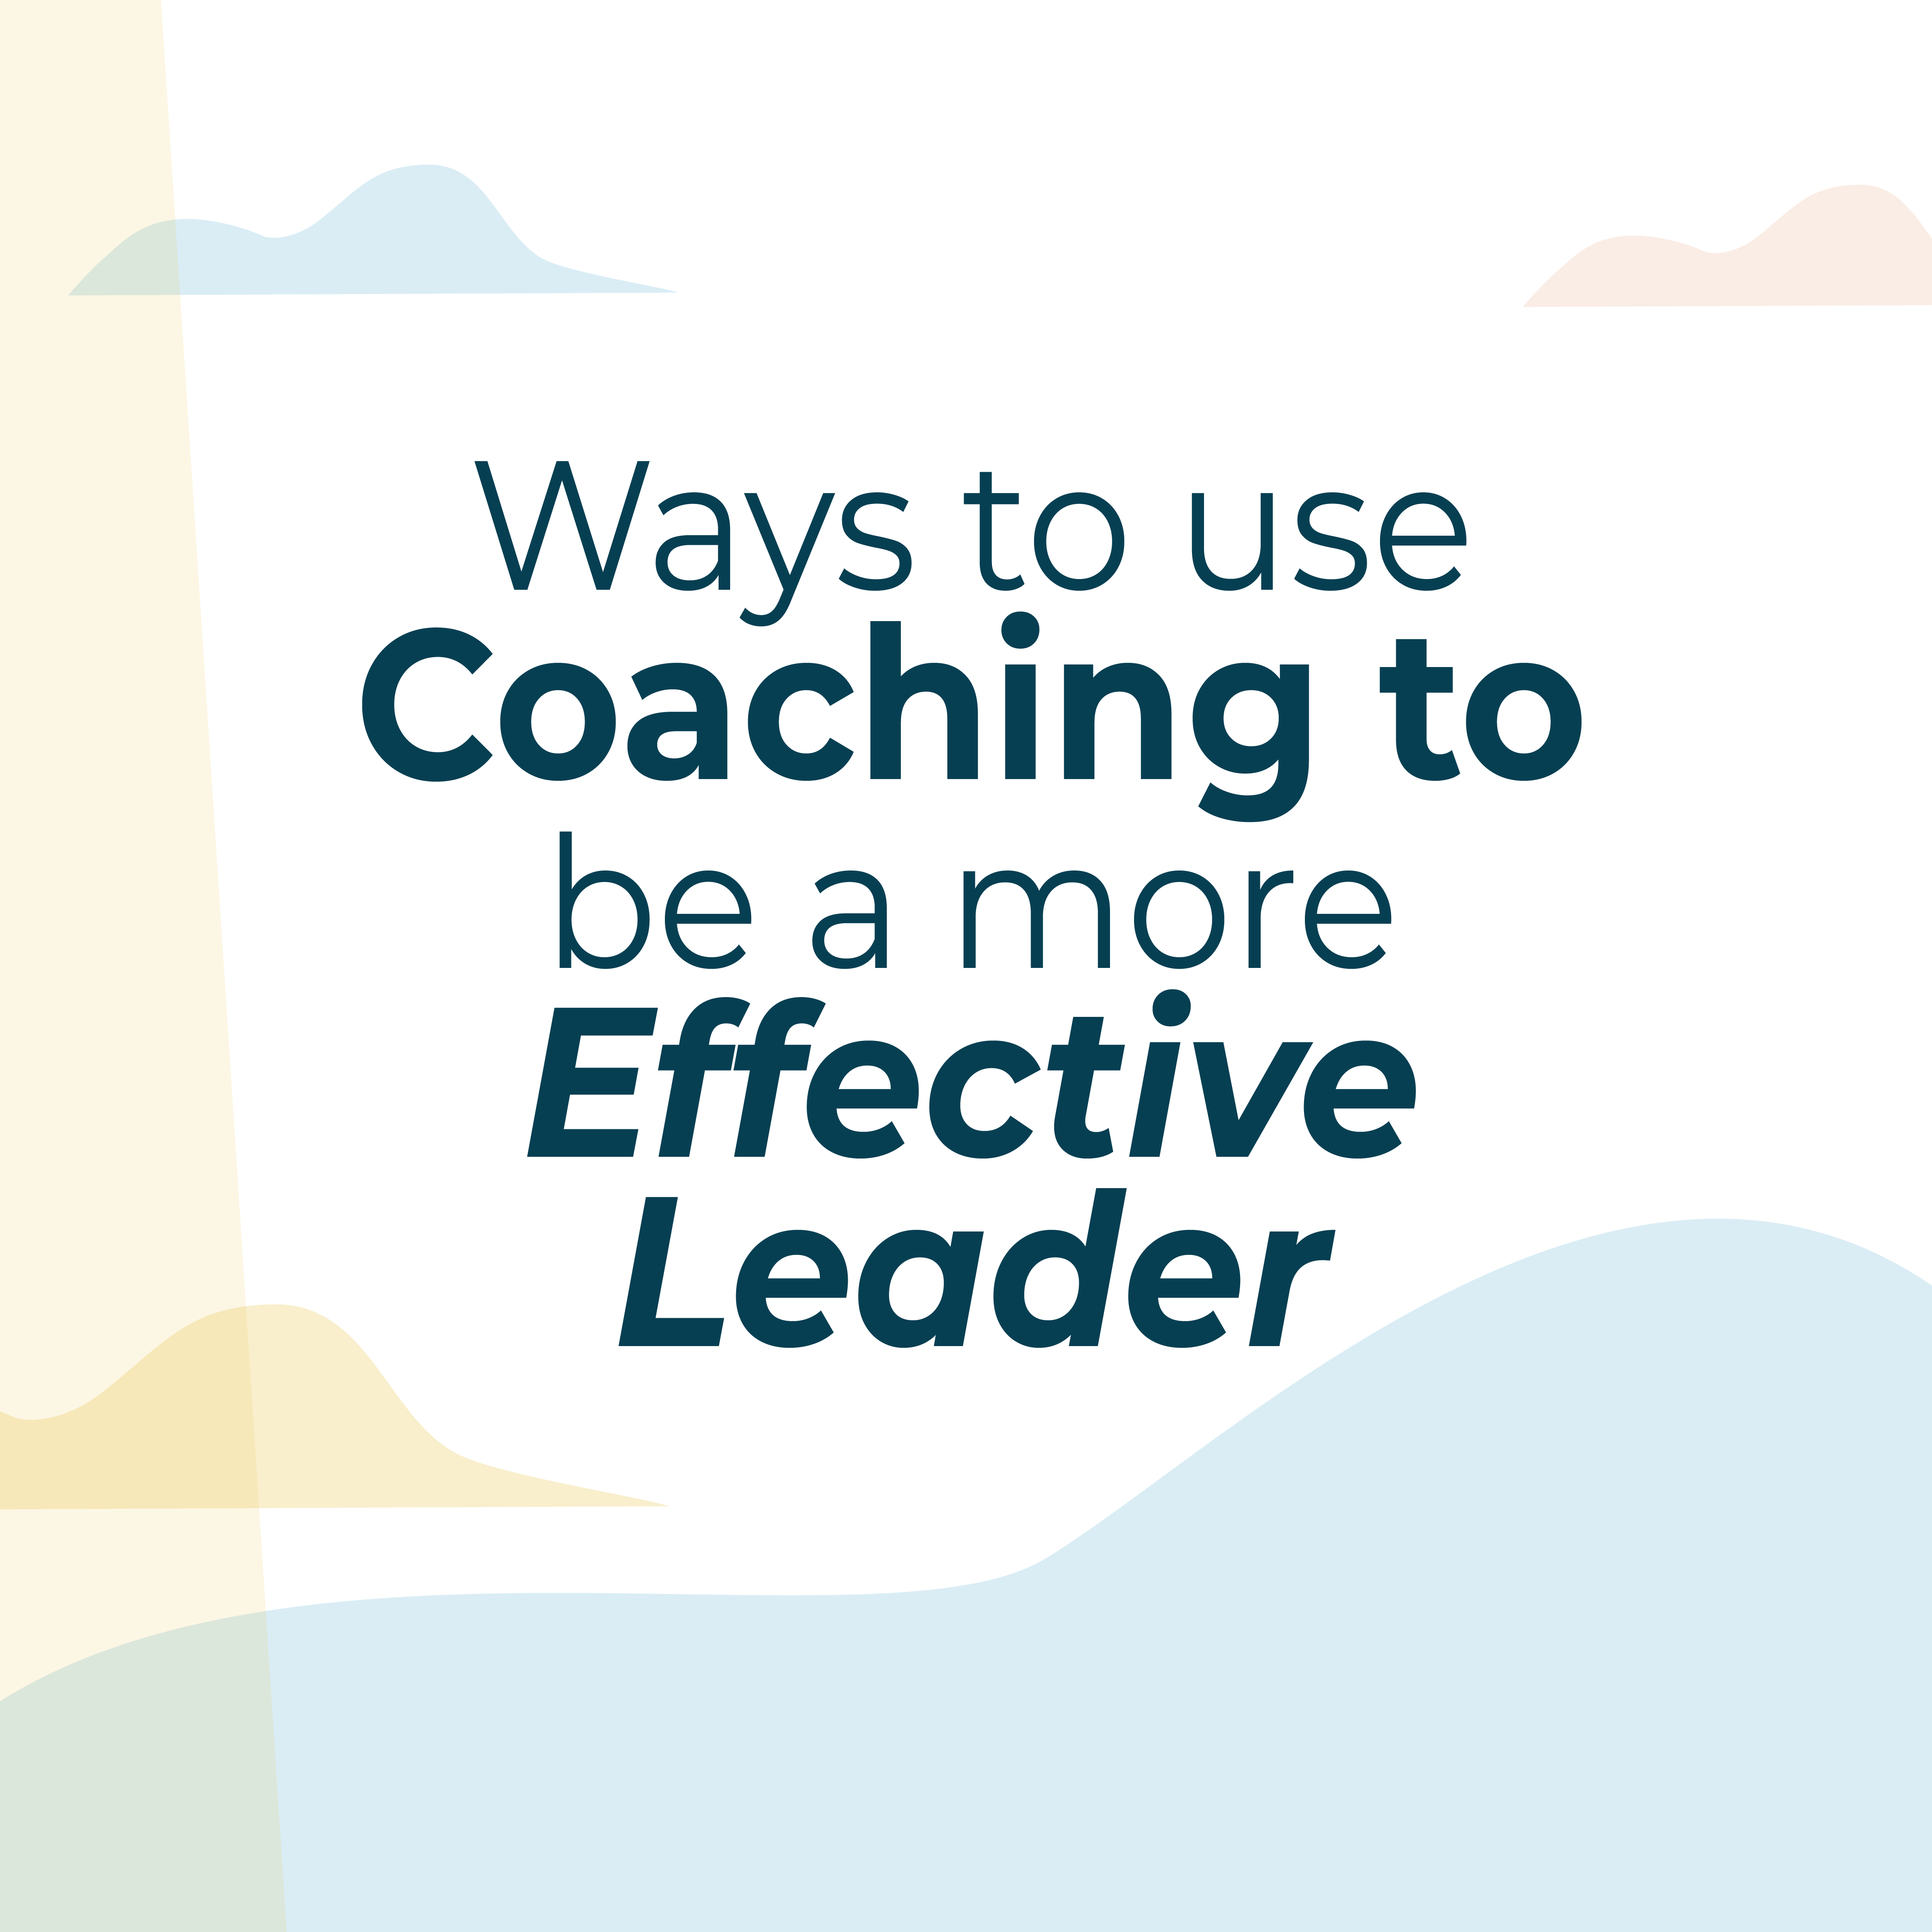 Ways to use Coaching to be a more Effective Leader